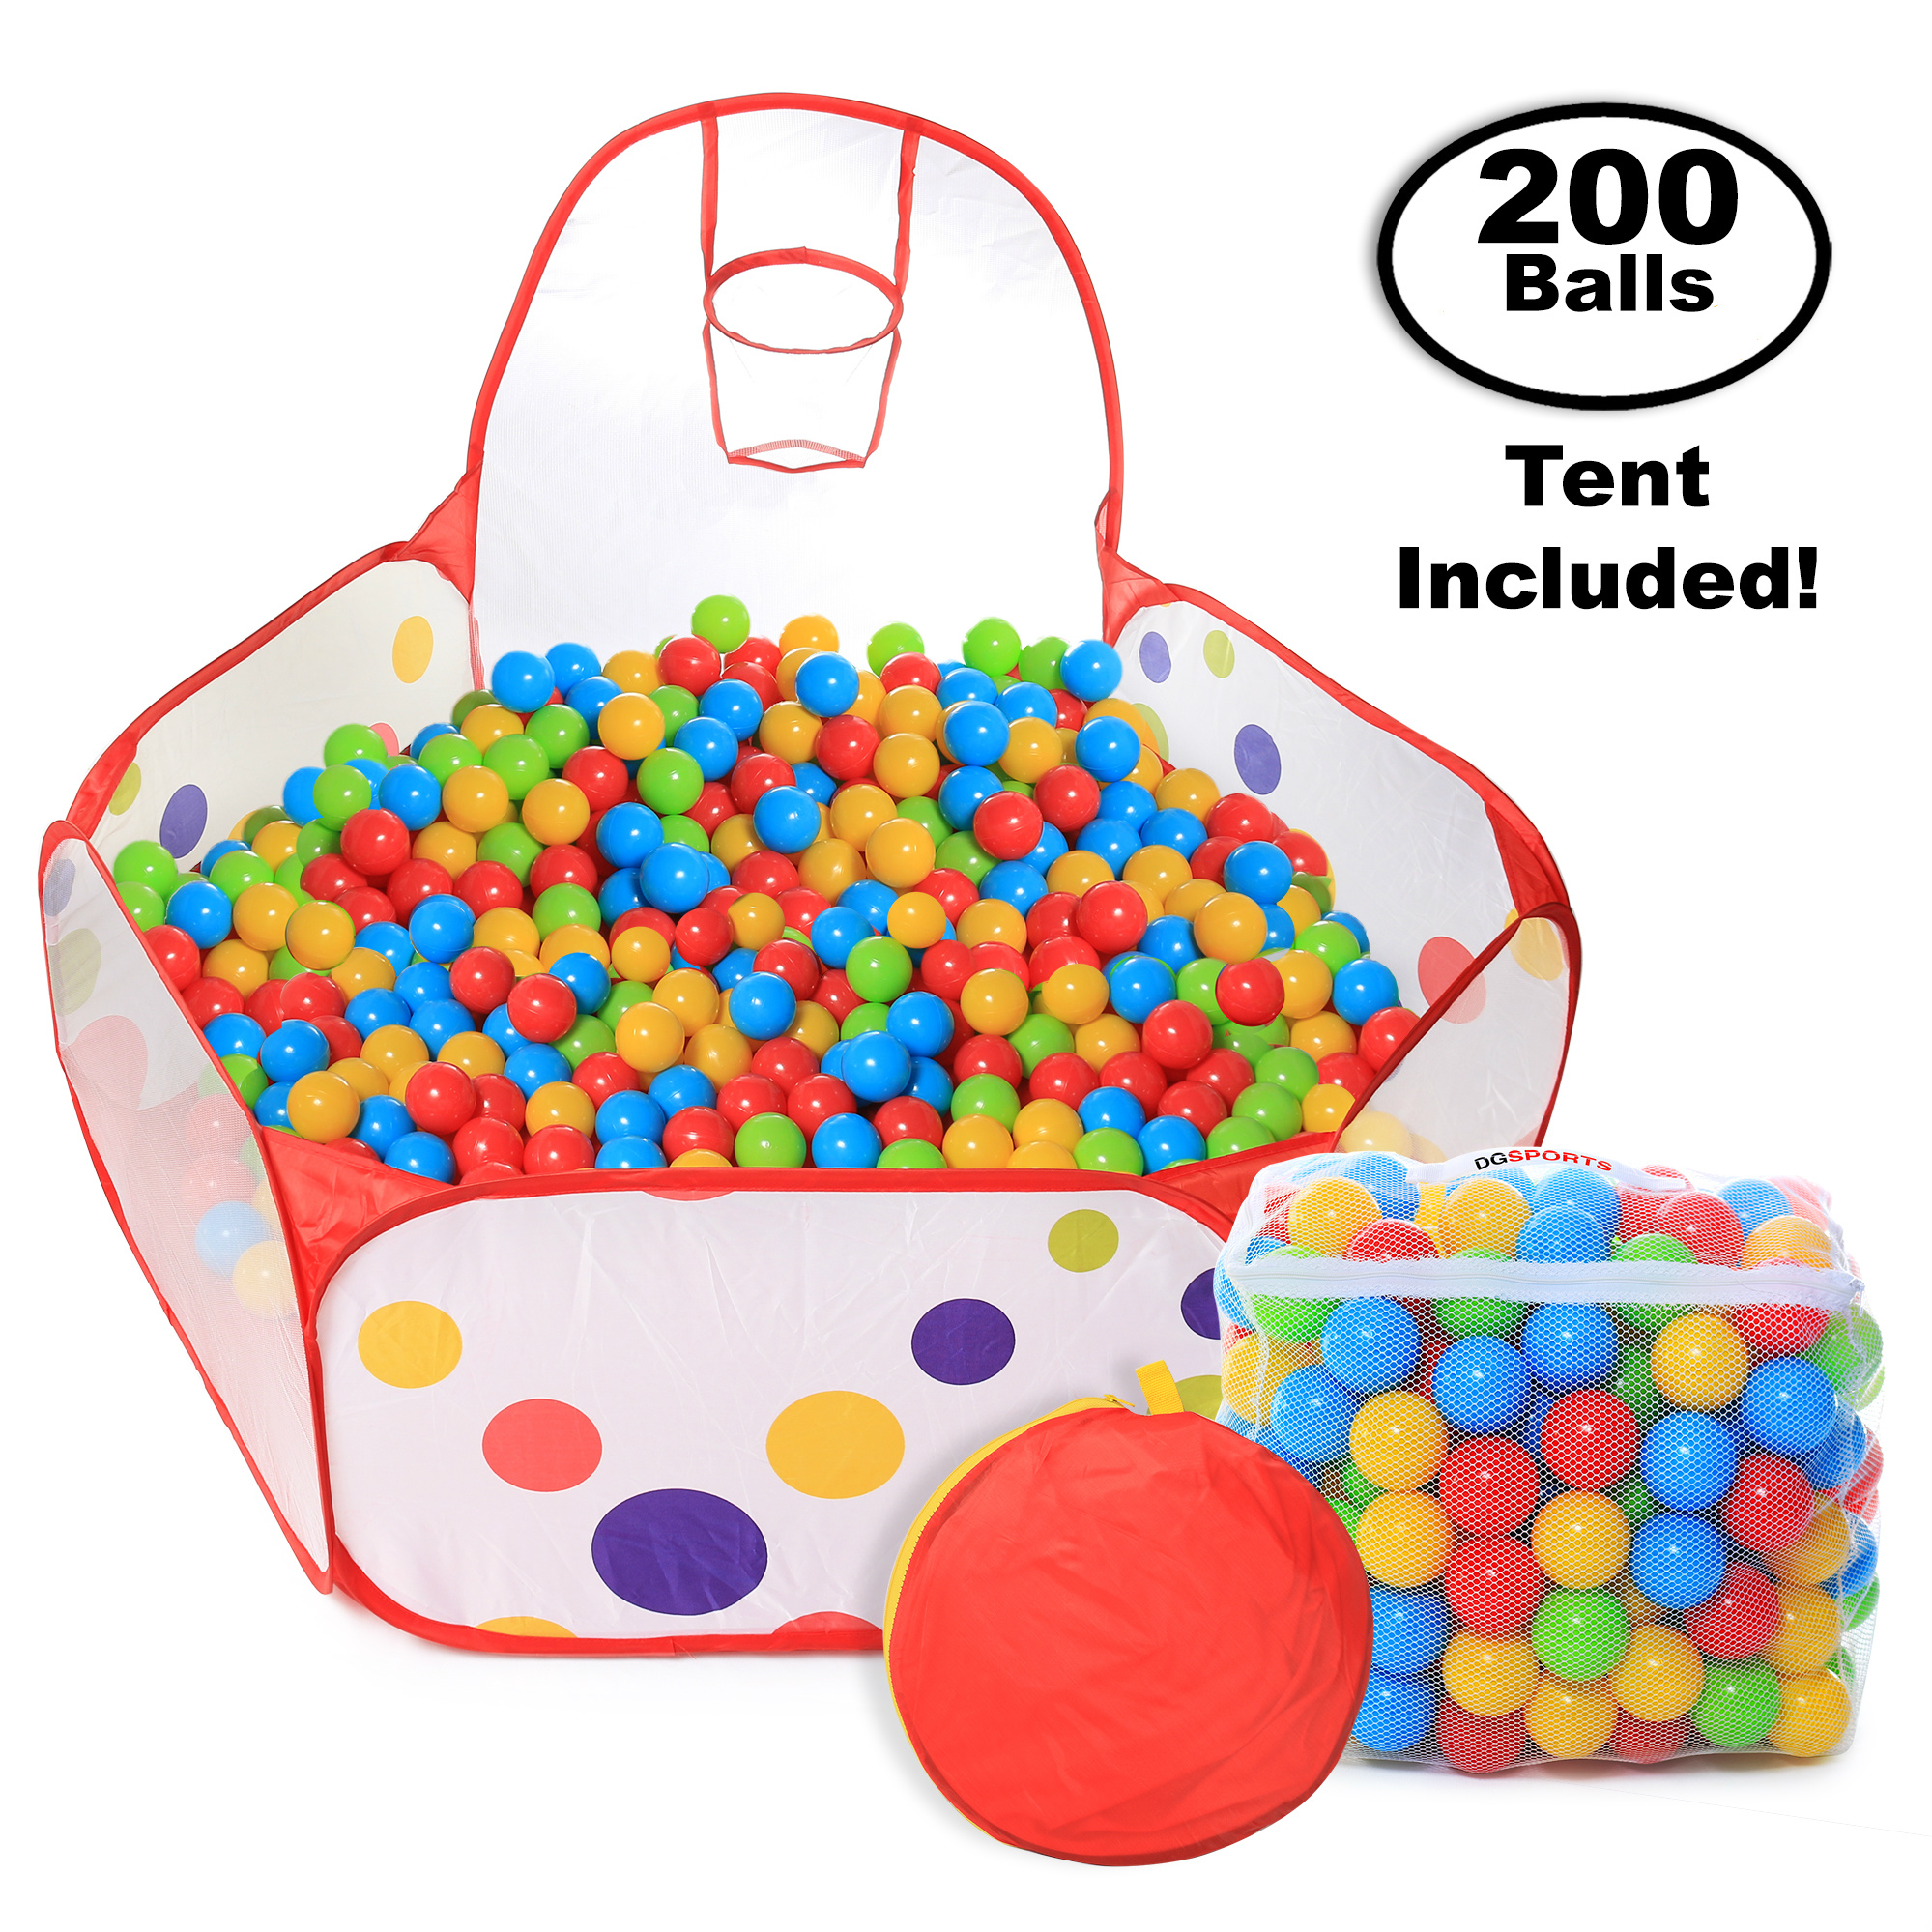 ball pit for kids